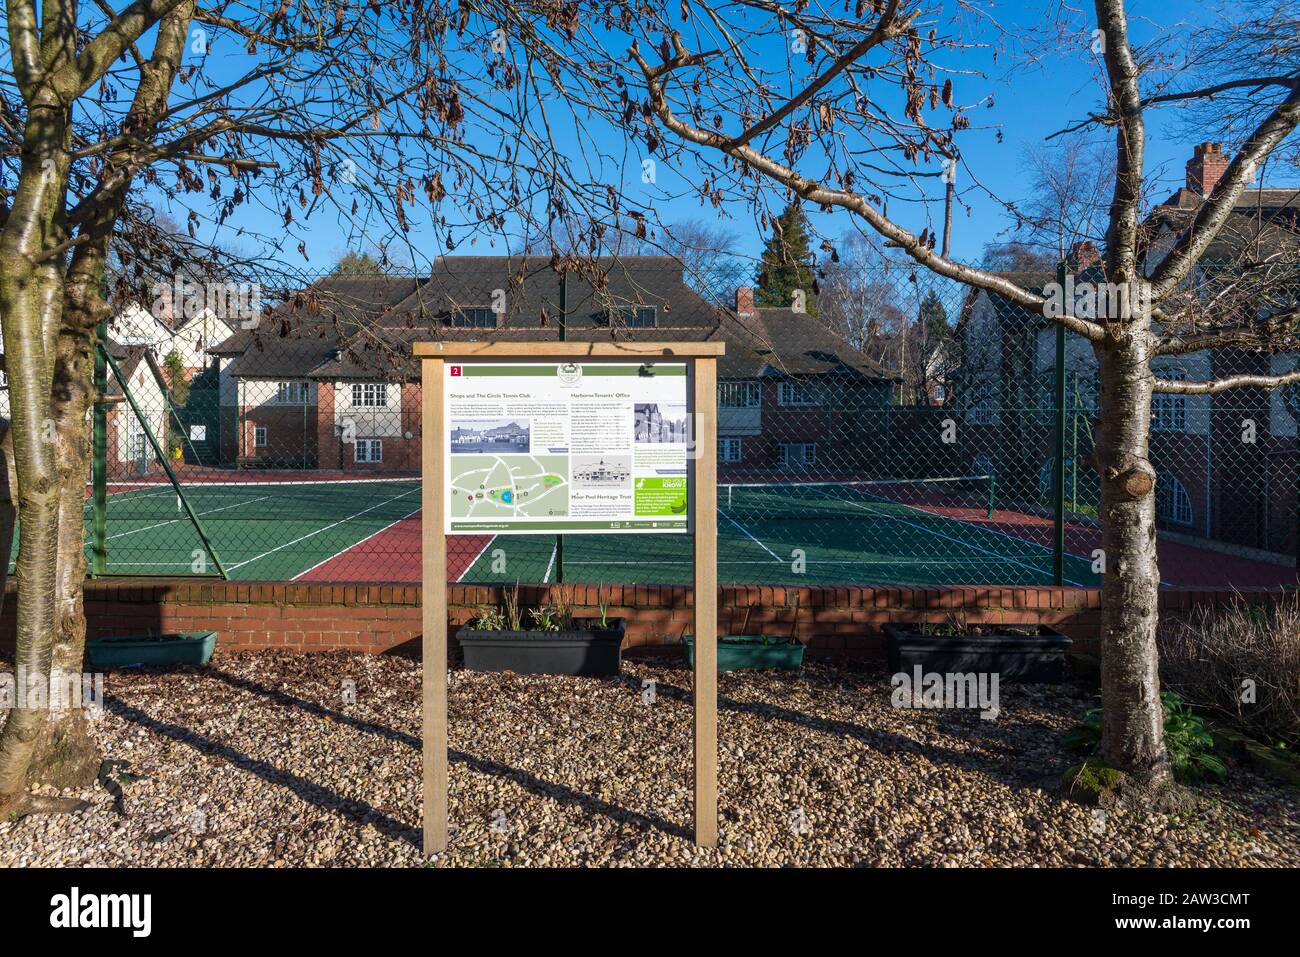 The tennis courts on the Moor Pool Estate which is a garden suburb in Harborne, Birmingham and is a conservation area. Stock Photo